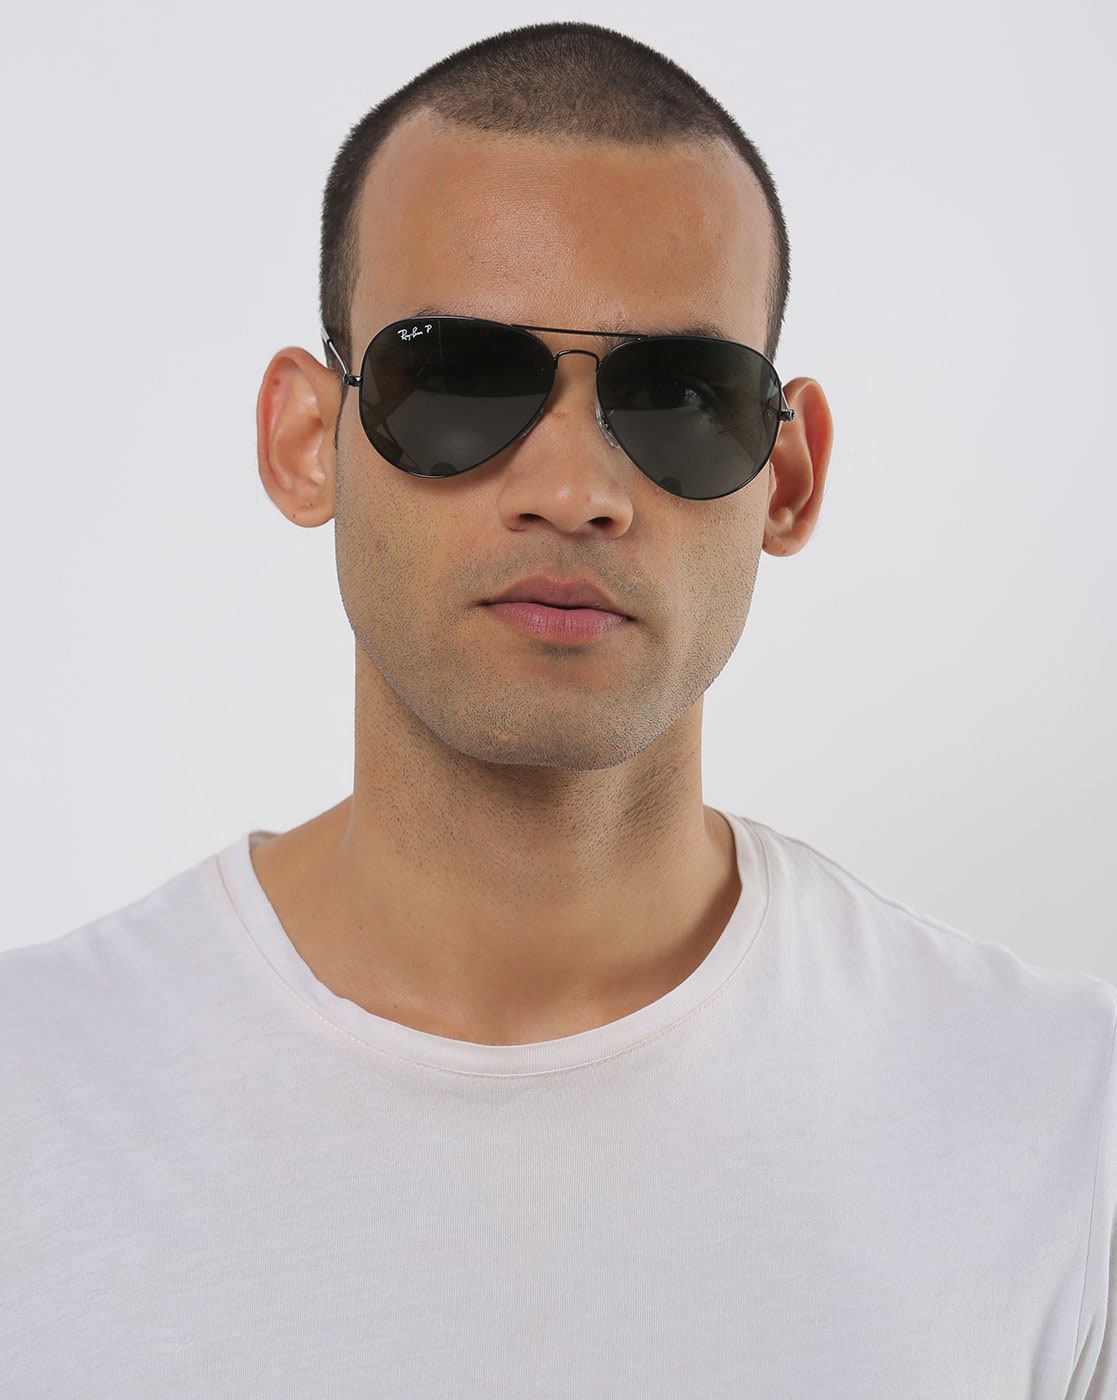 Buy Black Sunglasses For Men By Ray Ban Online Ajio Com